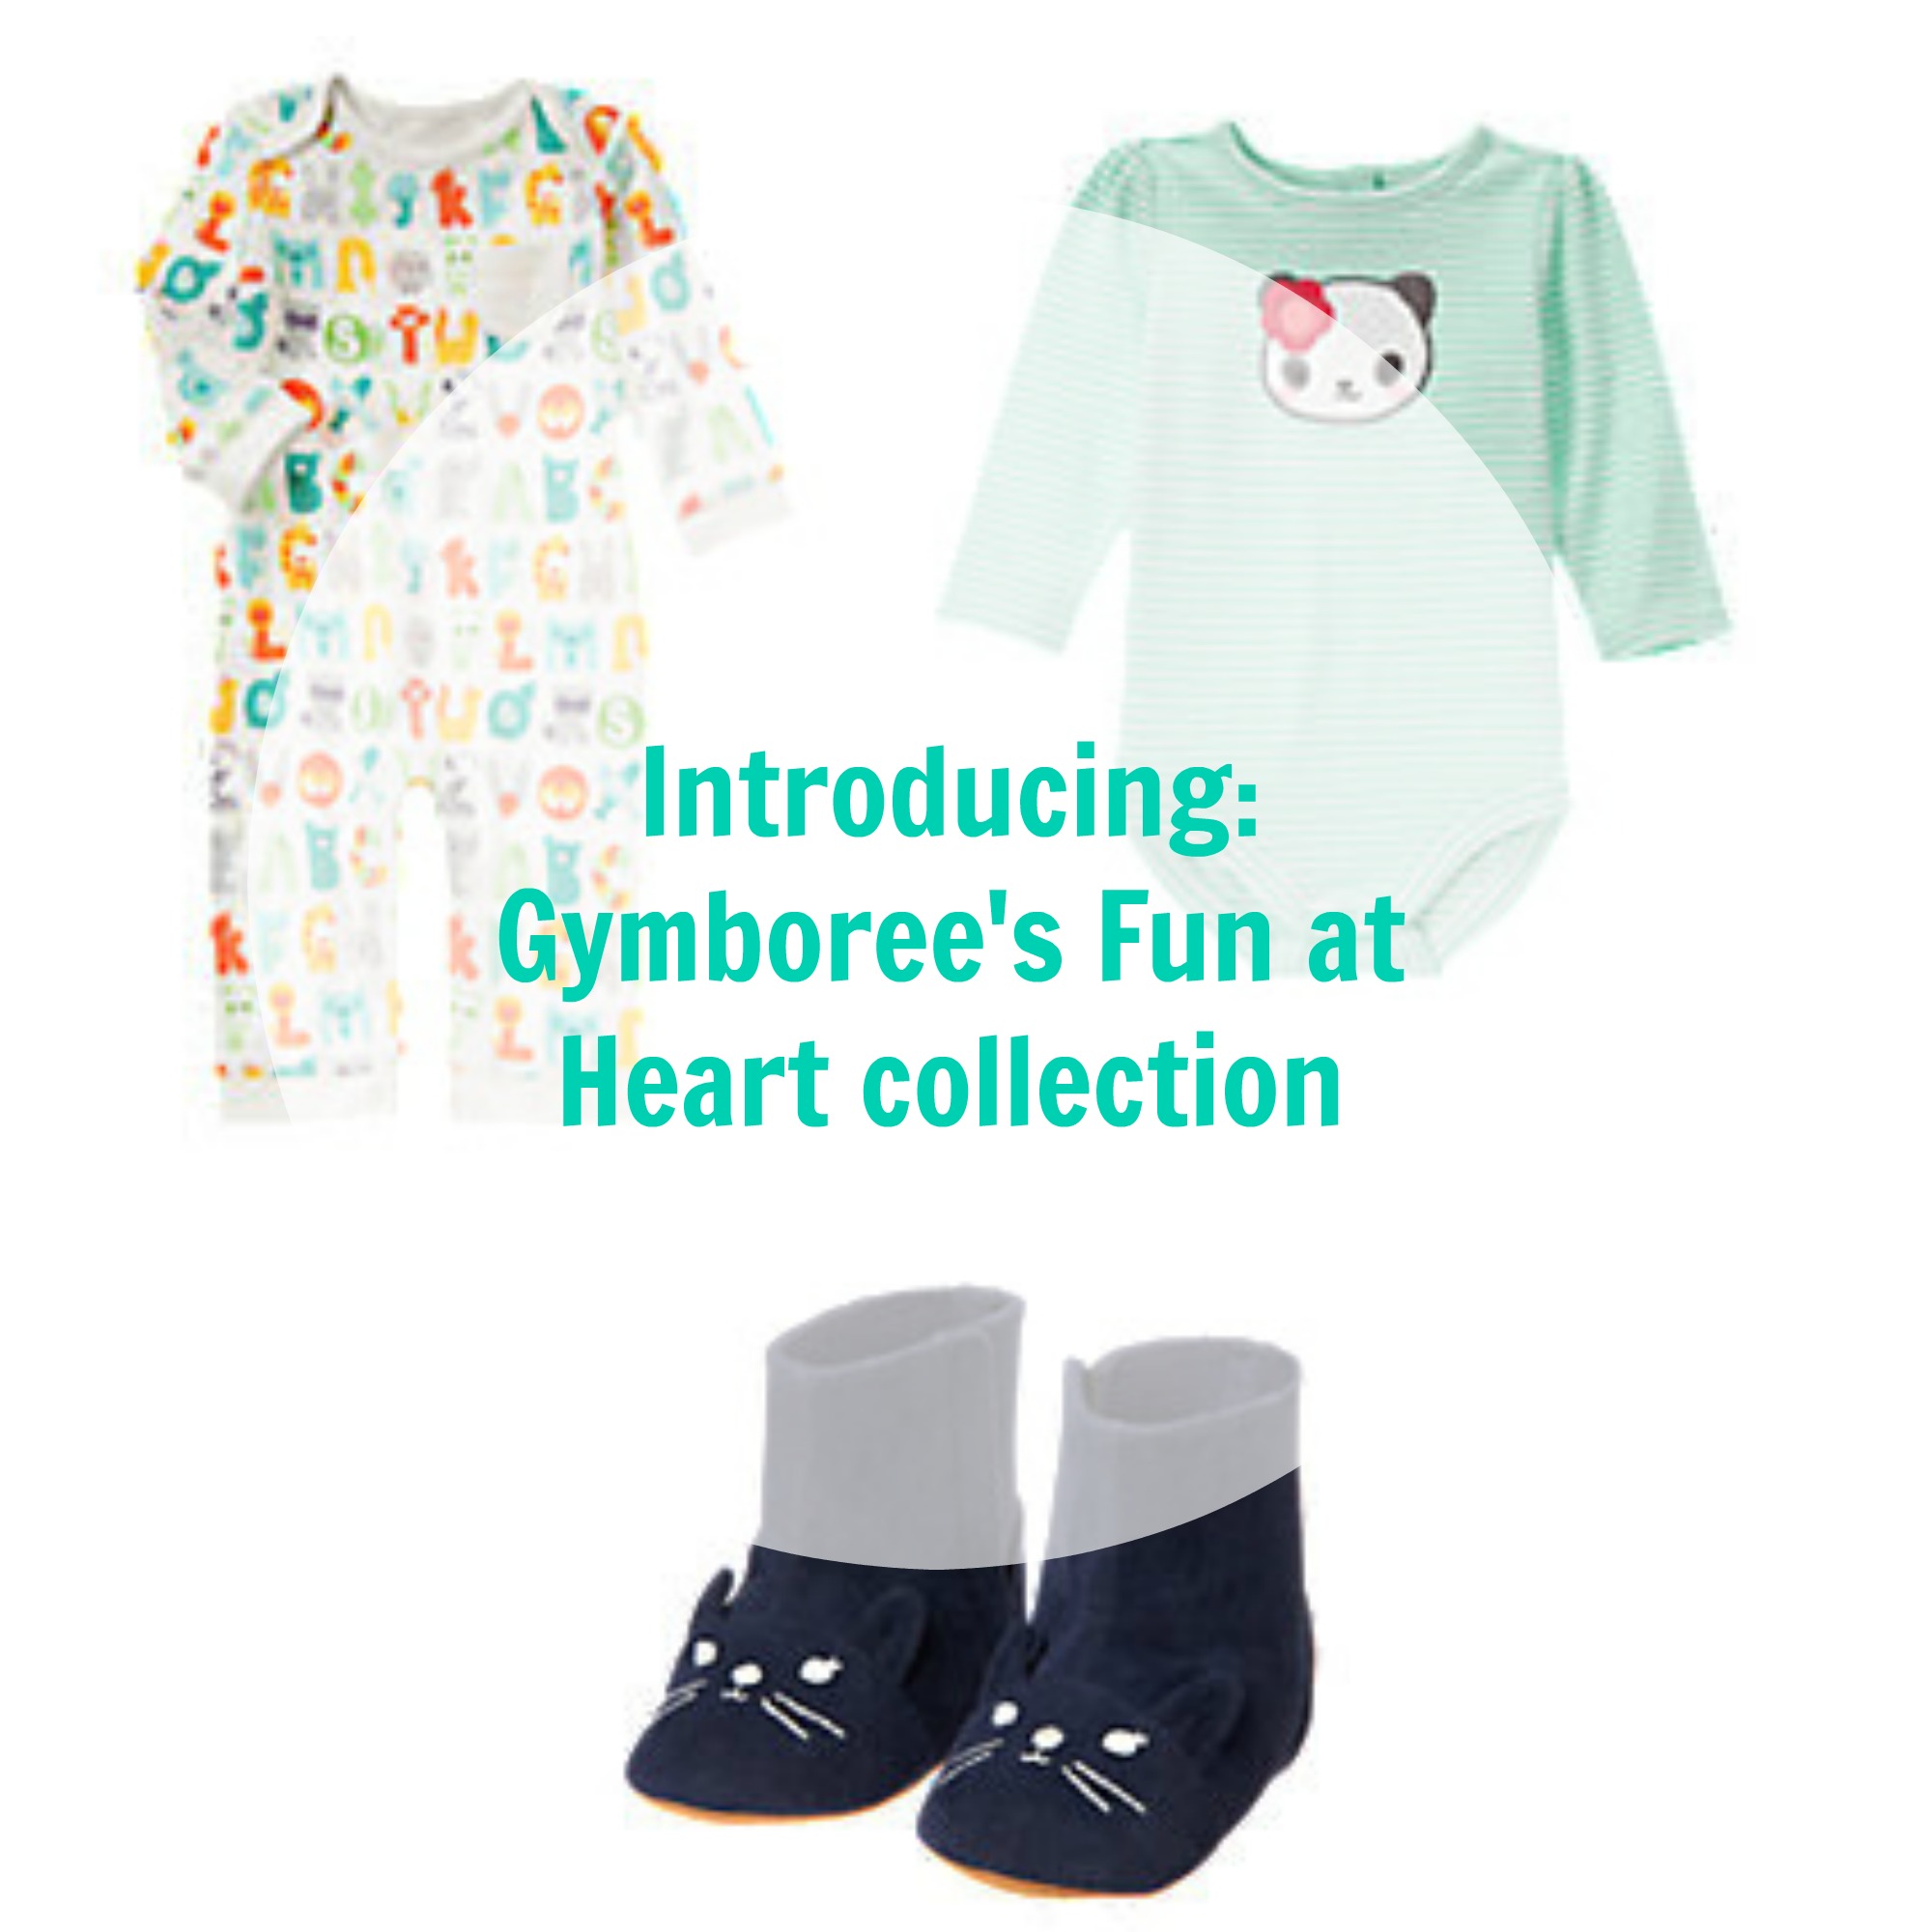 Gymboree’s Fun At Heart Collection